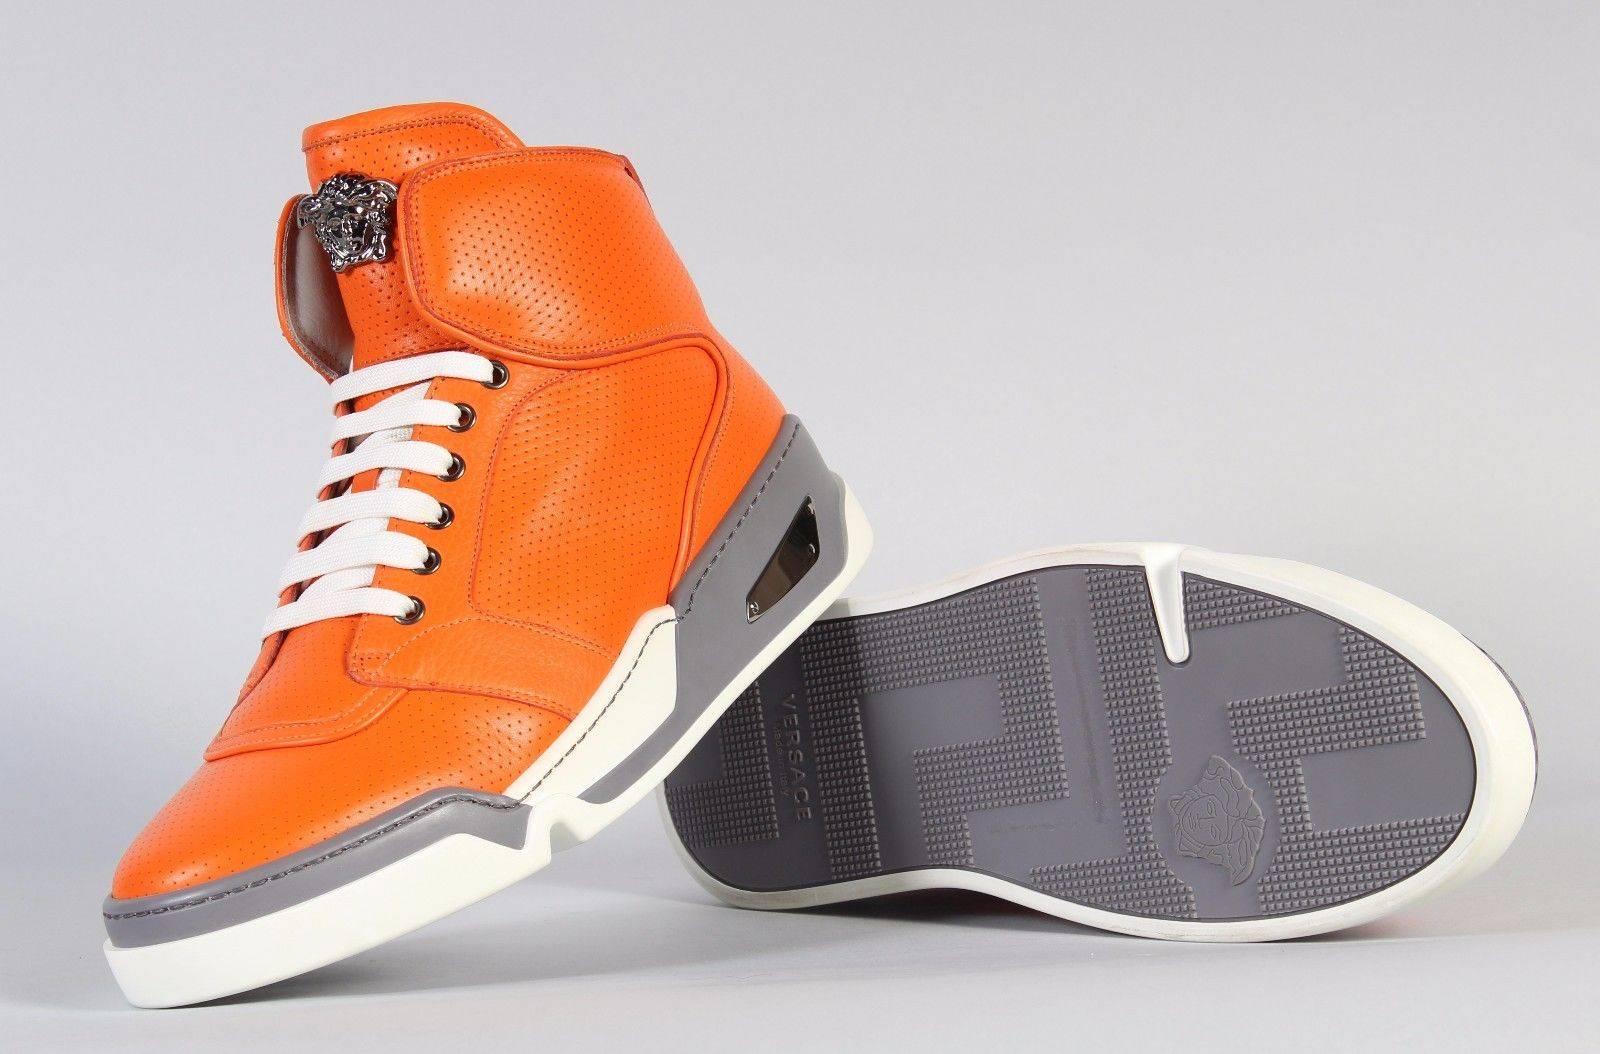 New Versace Men's Orange Perforated Leather High-Top Sneakers  1